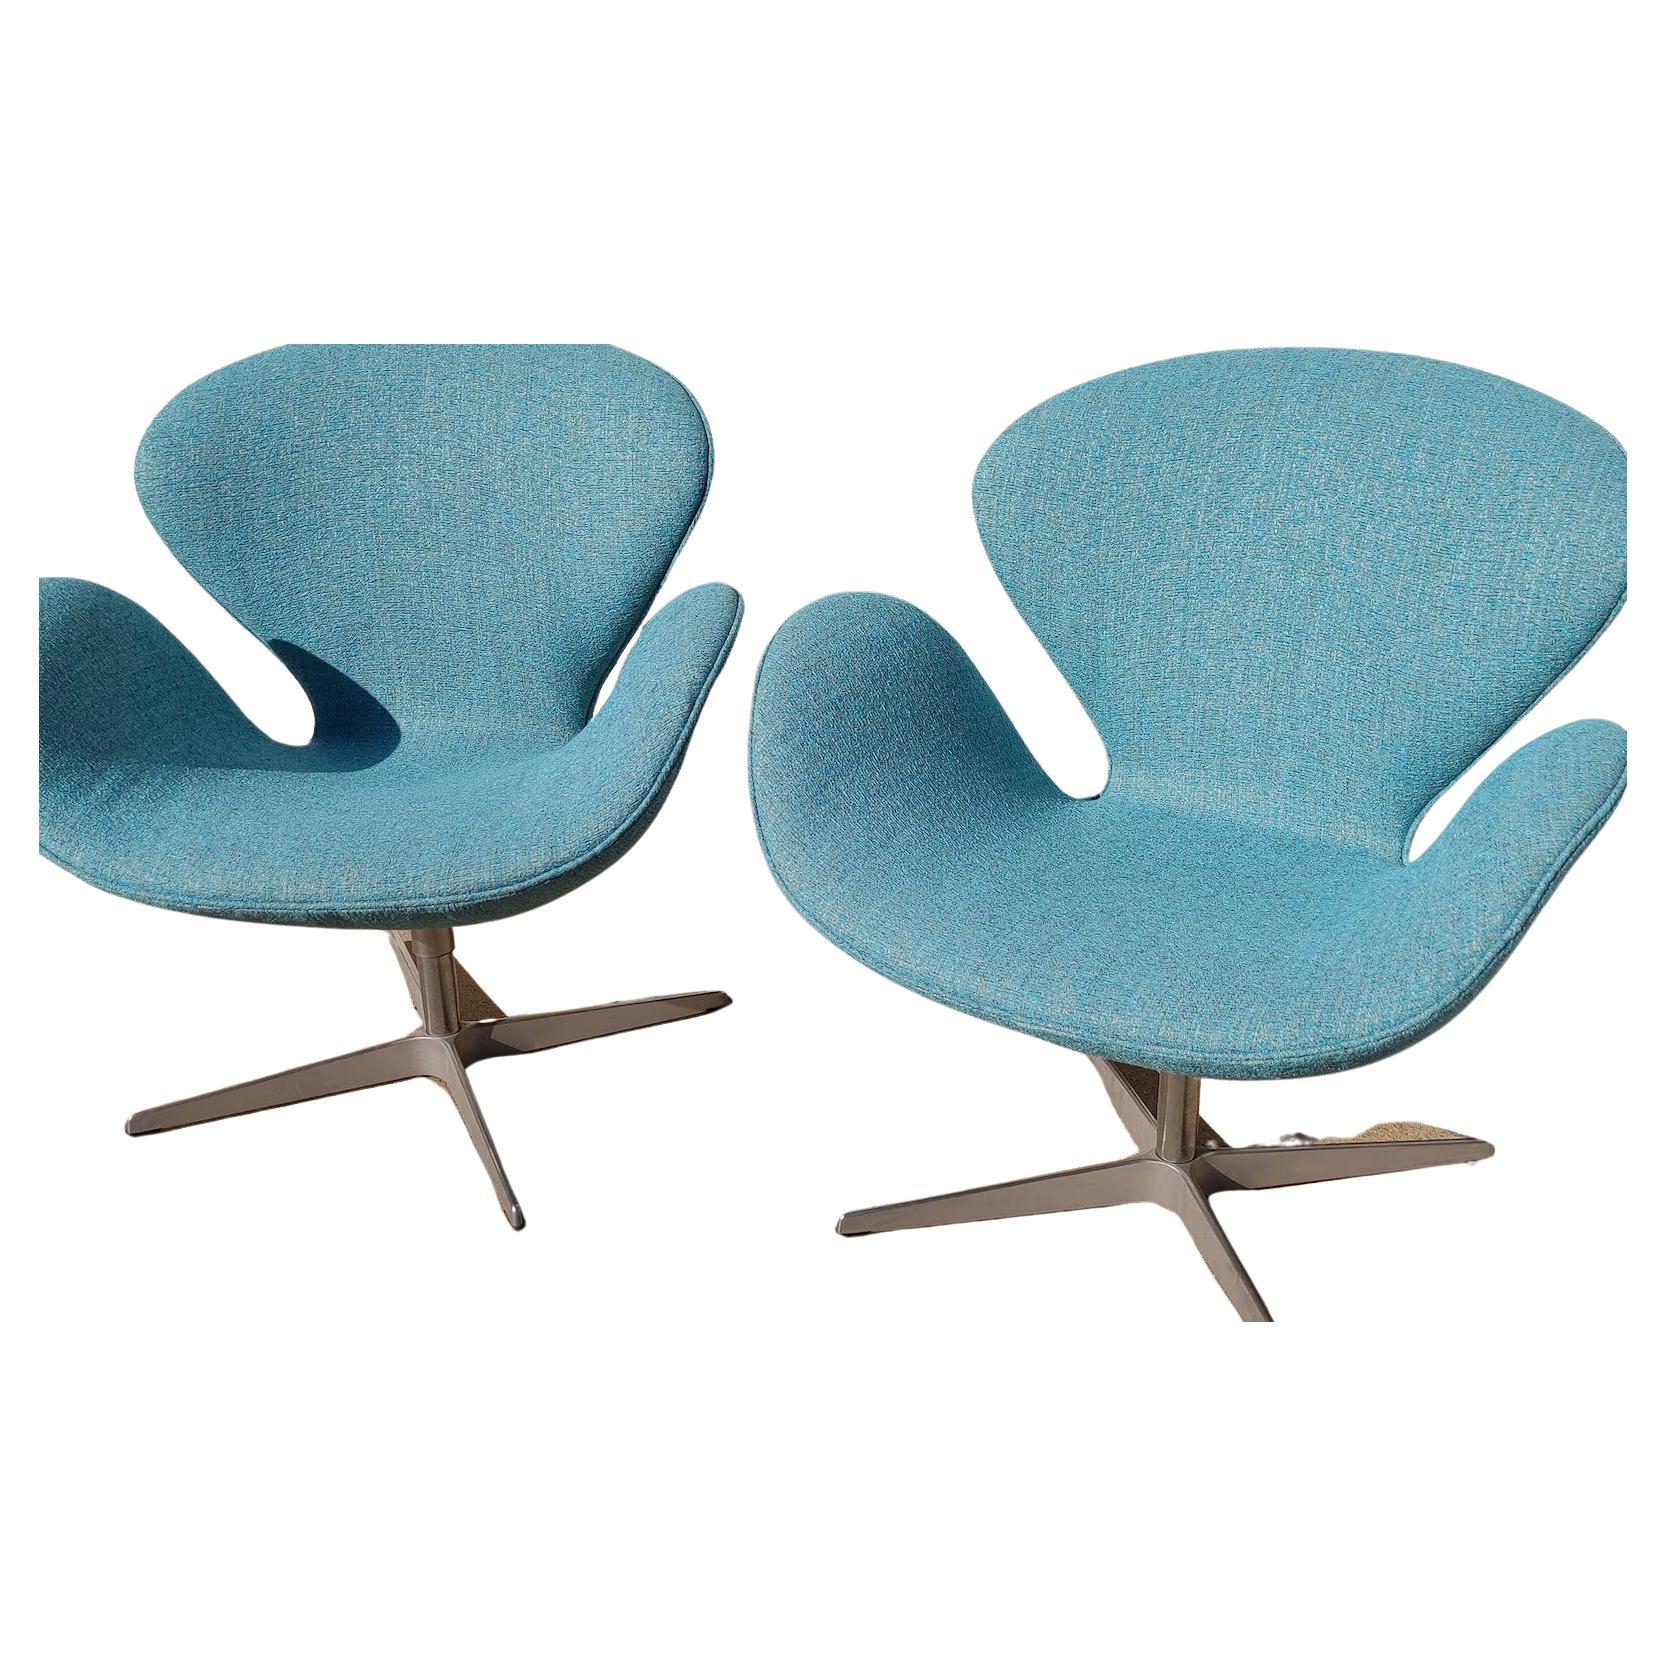 Pair of Mid Century Modern Danish Modern Arne Jacobsen Swan Chairs

Sold as pair. Above average vintage condition and structurally sound. Has some expected slight wear on bases. Upholstery is new. Outdoor listing pictures might appear slightly